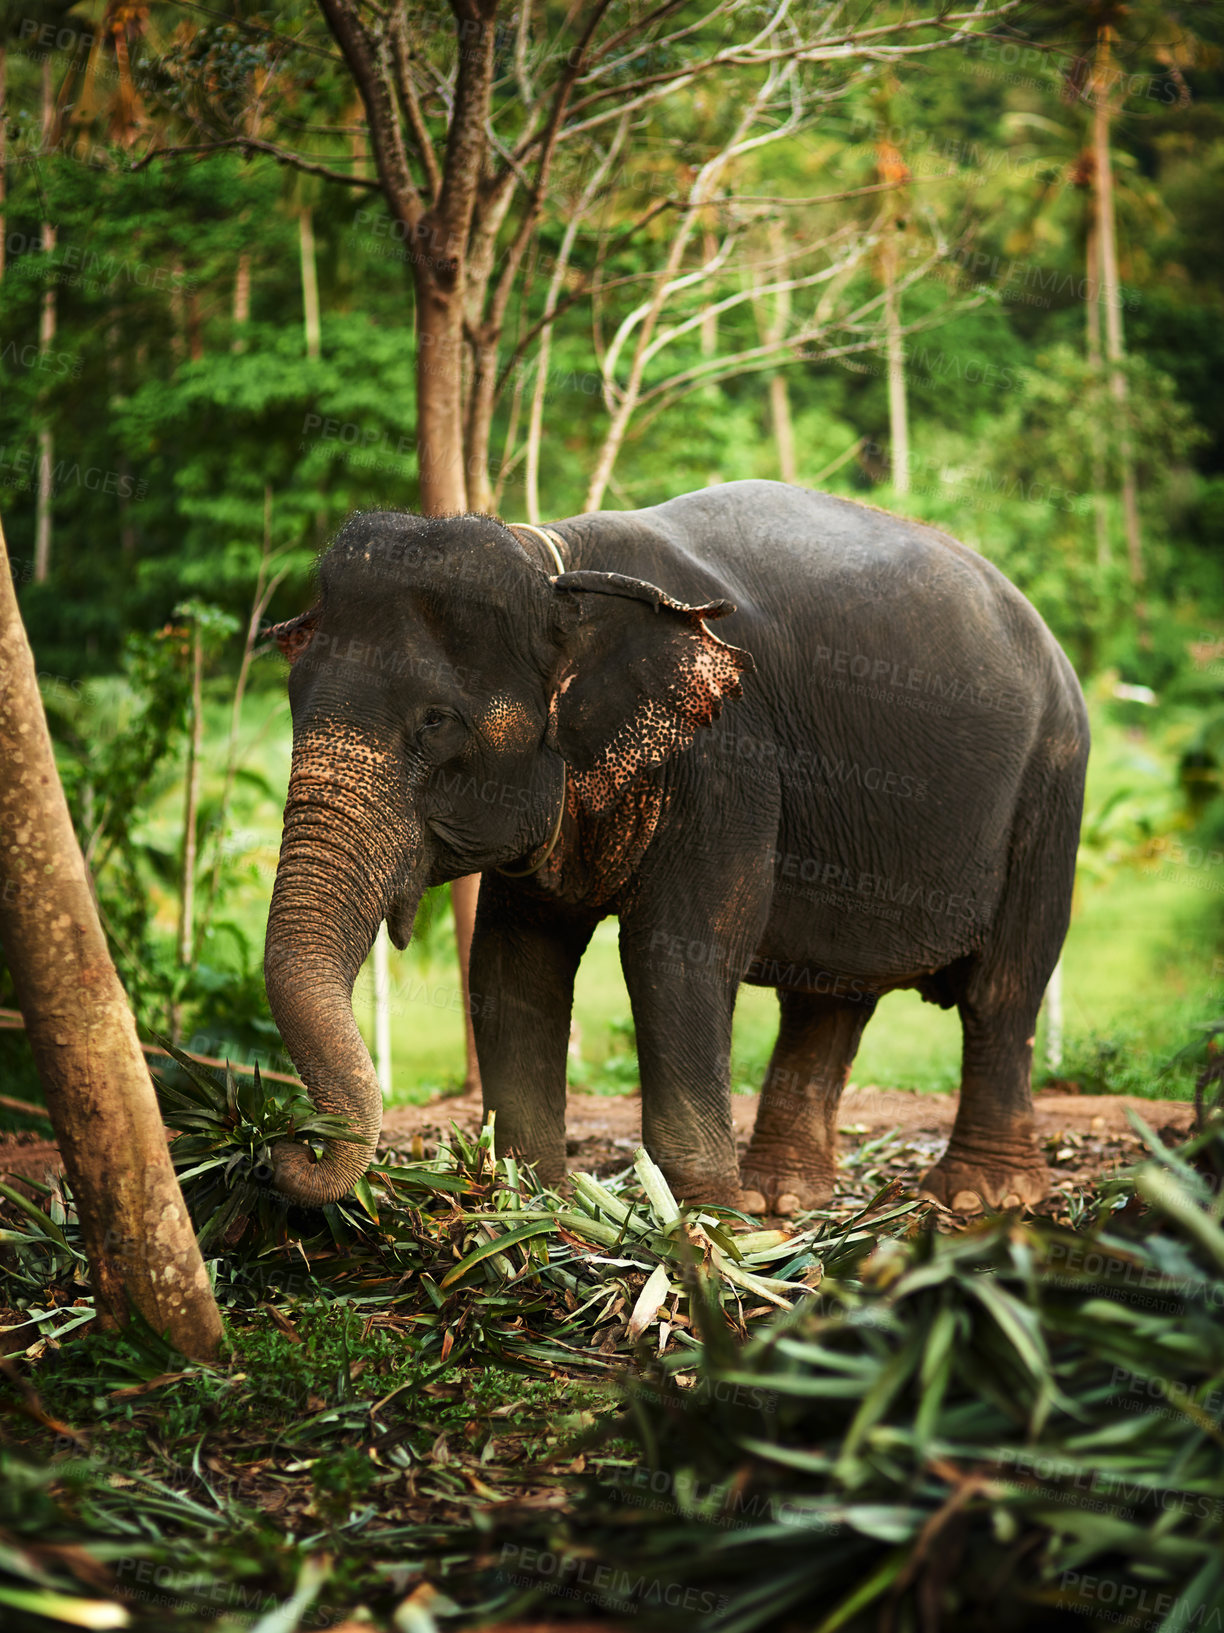 Buy stock photo Shot of a elephant walking in the jungle going about it's day and eating plants